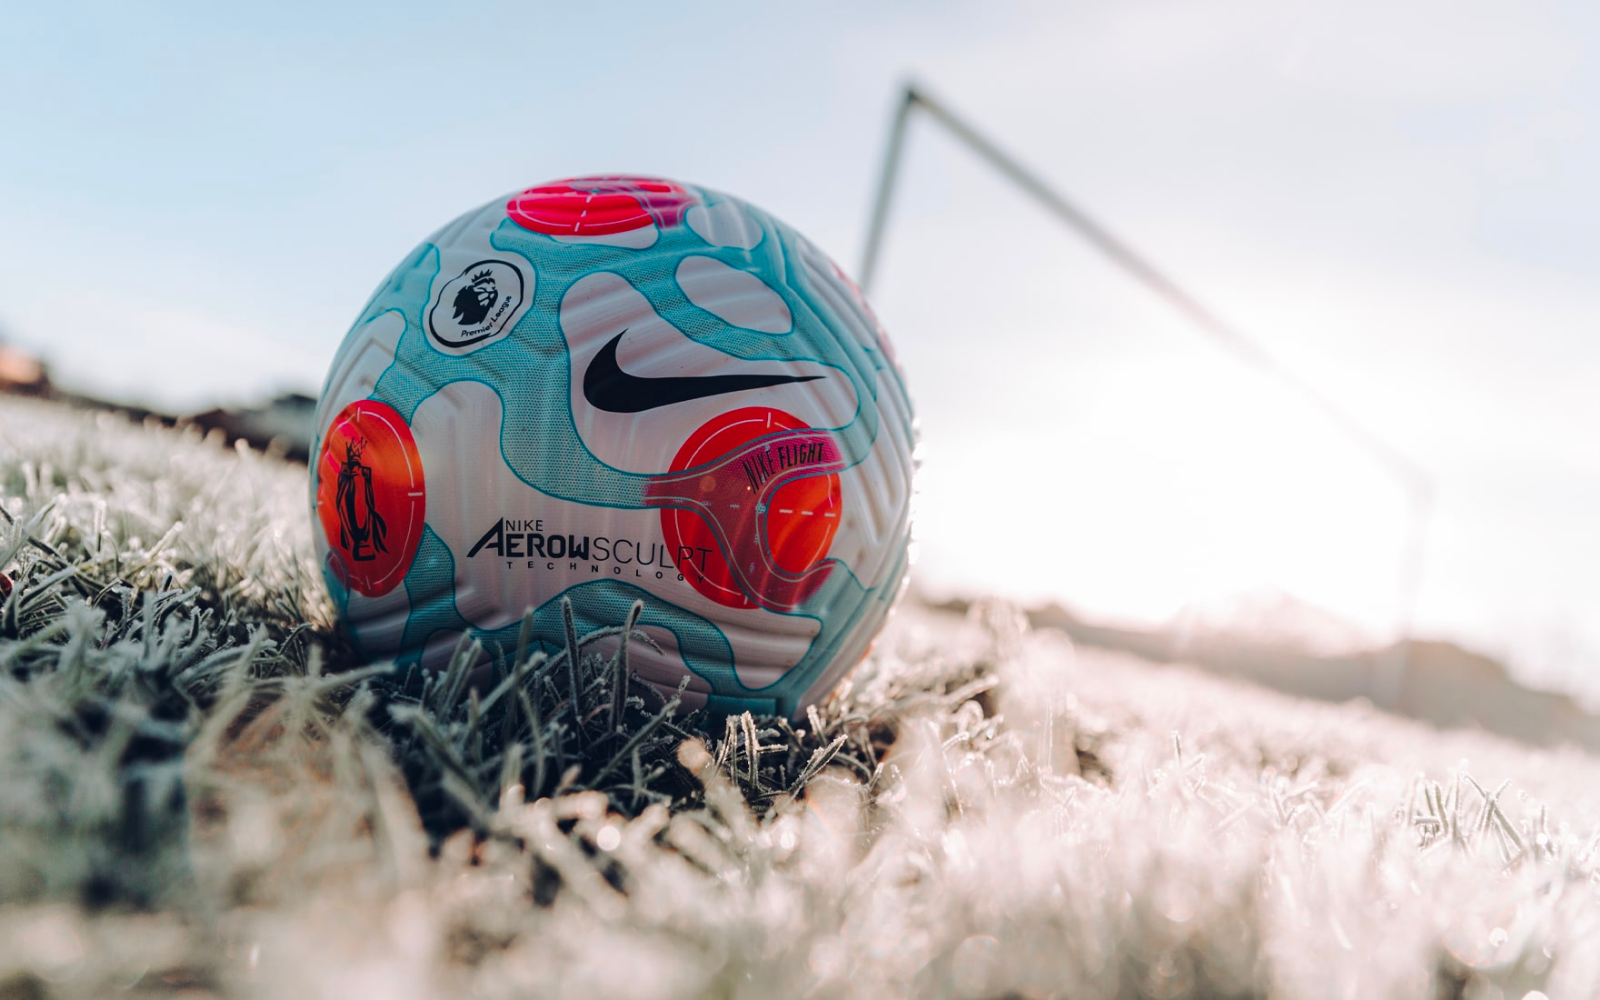 Third Premier League ball on its way